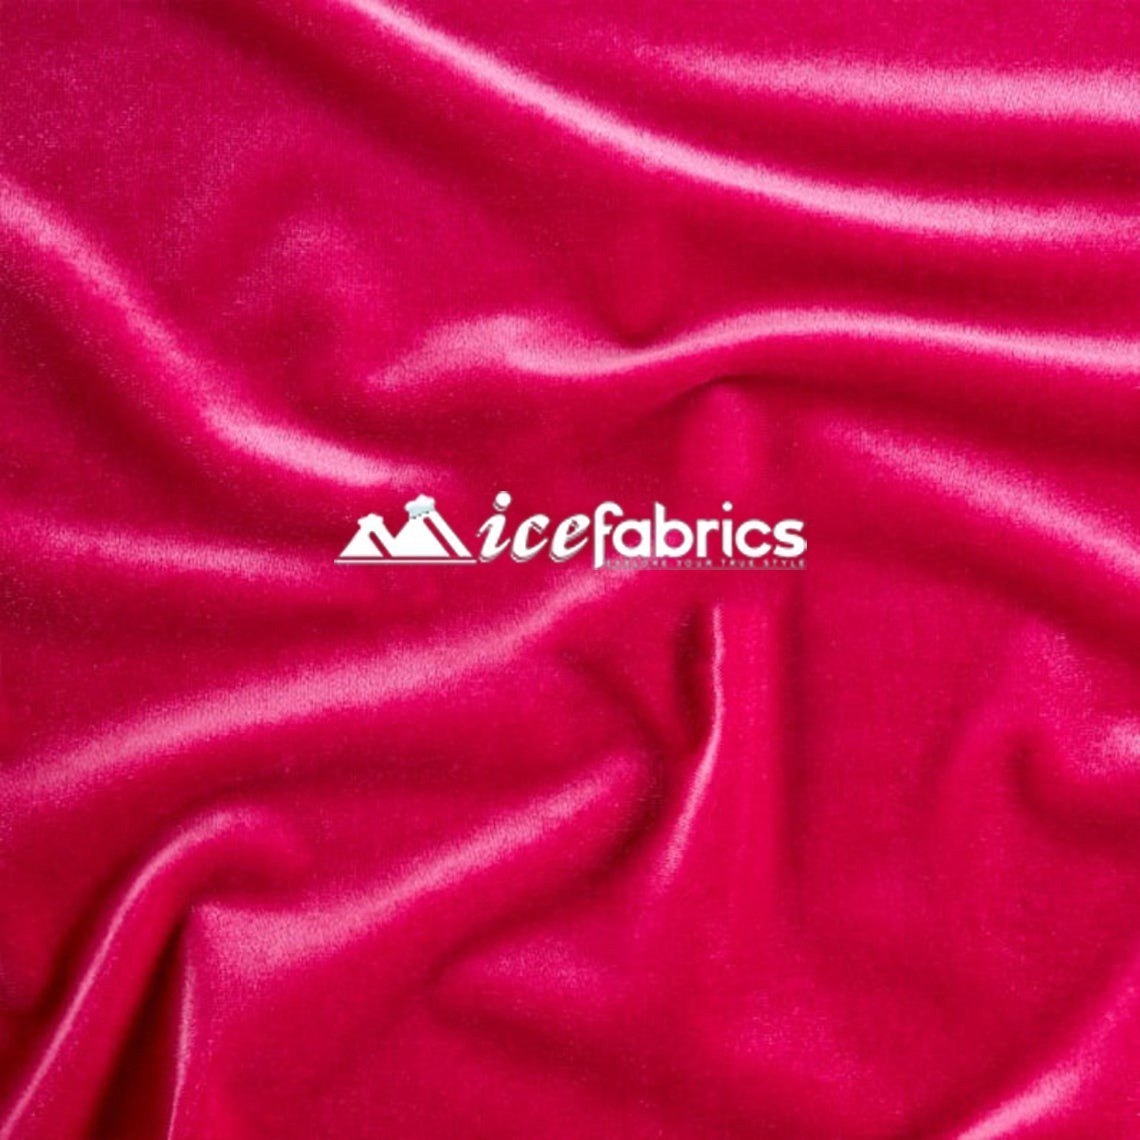 Hight Quality Stretch Velvet Fabric By The Roll (20 yards) Wholesale FabricVelvet FabricICE FABRICSICE FABRICSFuchsiaBy The Roll (60" Wide)Hight Quality Stretch Velvet Fabric By The Roll (20 yards) Wholesale Fabric ICE FABRICS Fuchsia